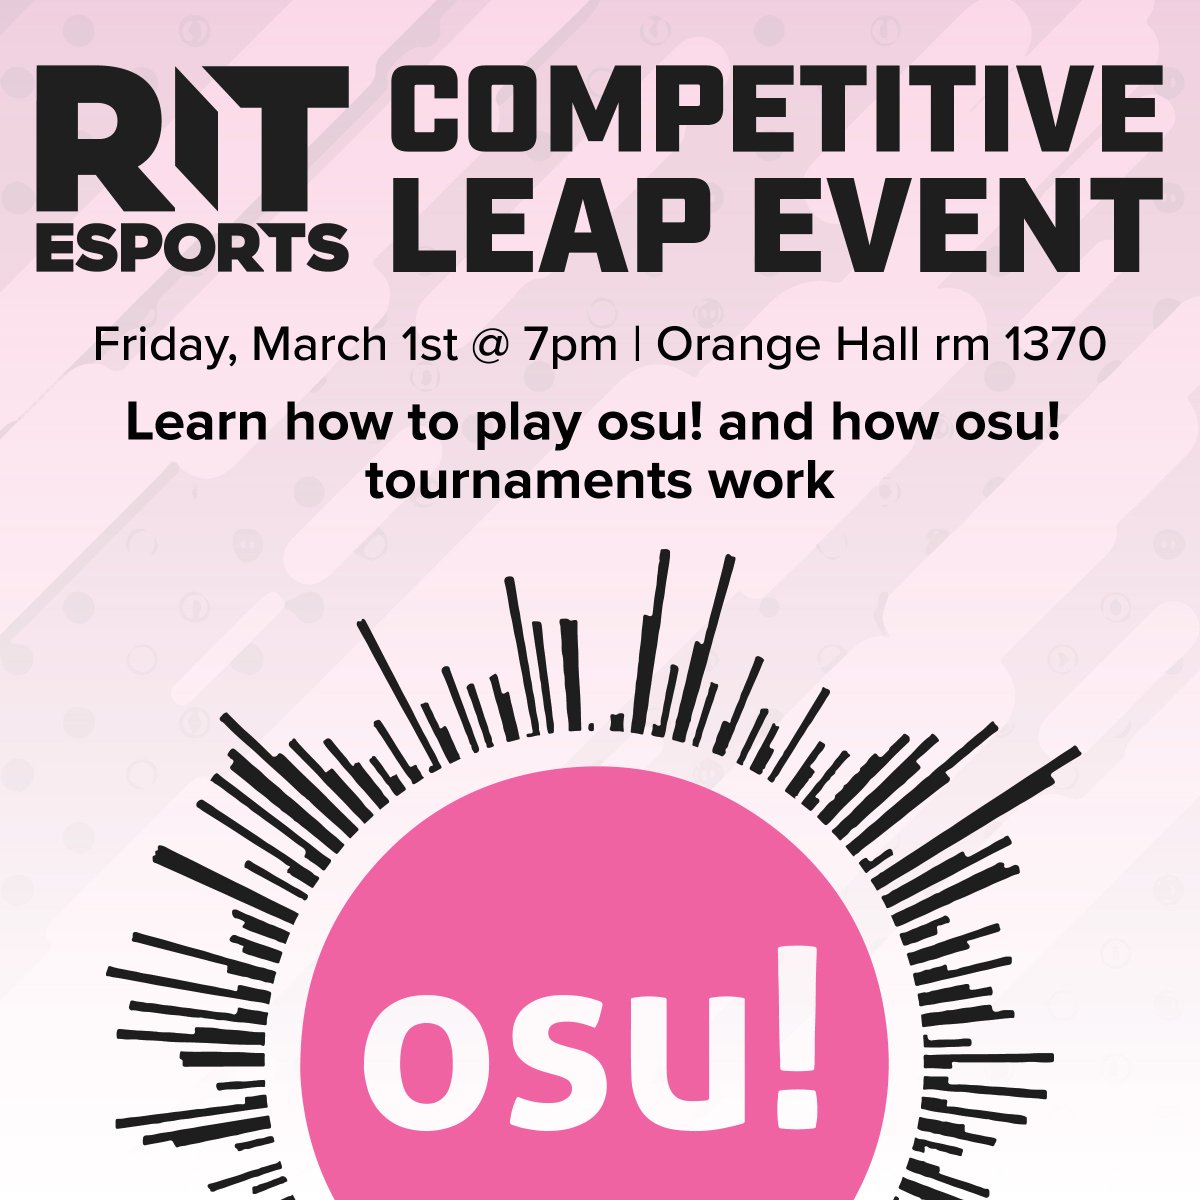 Do you love clicking circles? Or want to learn how to? Join us this Friday at 7pm in Orange Hall for our first osu! competitive leap! Competitive leaps are workshops meant to teach and hone new skills for players and open to anyone! (if you are coming bring ur own gear plz)